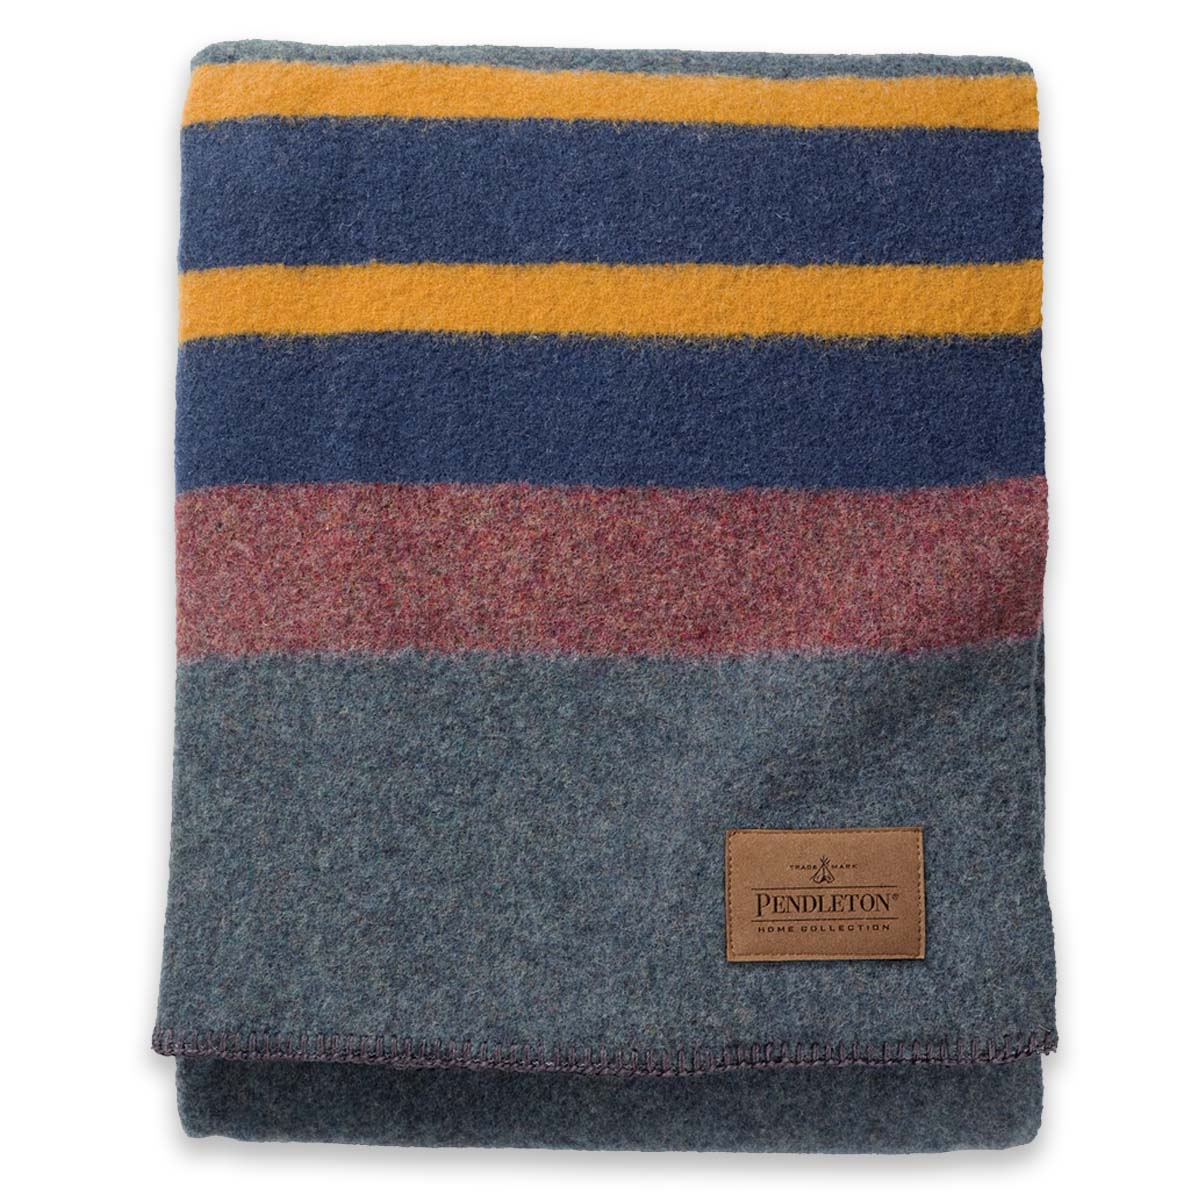 Pendleton Yakima Camp Blanket Throw Lake, perfectly sized for the sofa, chair or foot of the bed